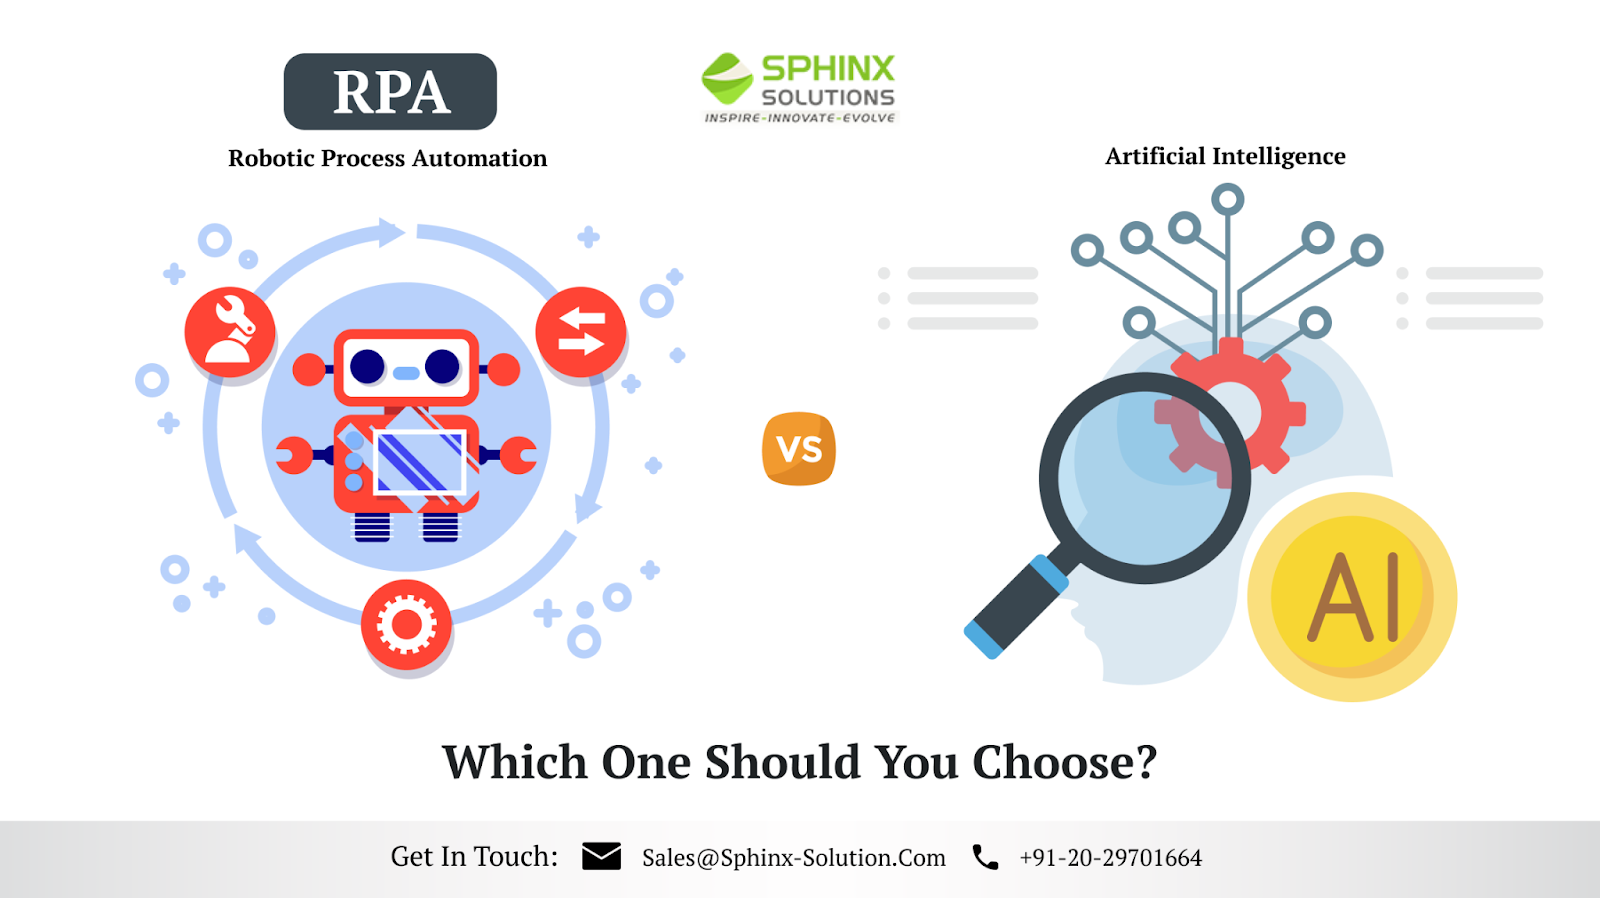 2
RPA & So.imovs

INSPIRE INNOVATE

Robotic Process Automation Artificial Intelligence

 
  
 

Na 0

. Al

Which One Should You Choose?

Get In Touch: Ng Sales@Sphinx-Solution.Com Rg +91-20-29701664